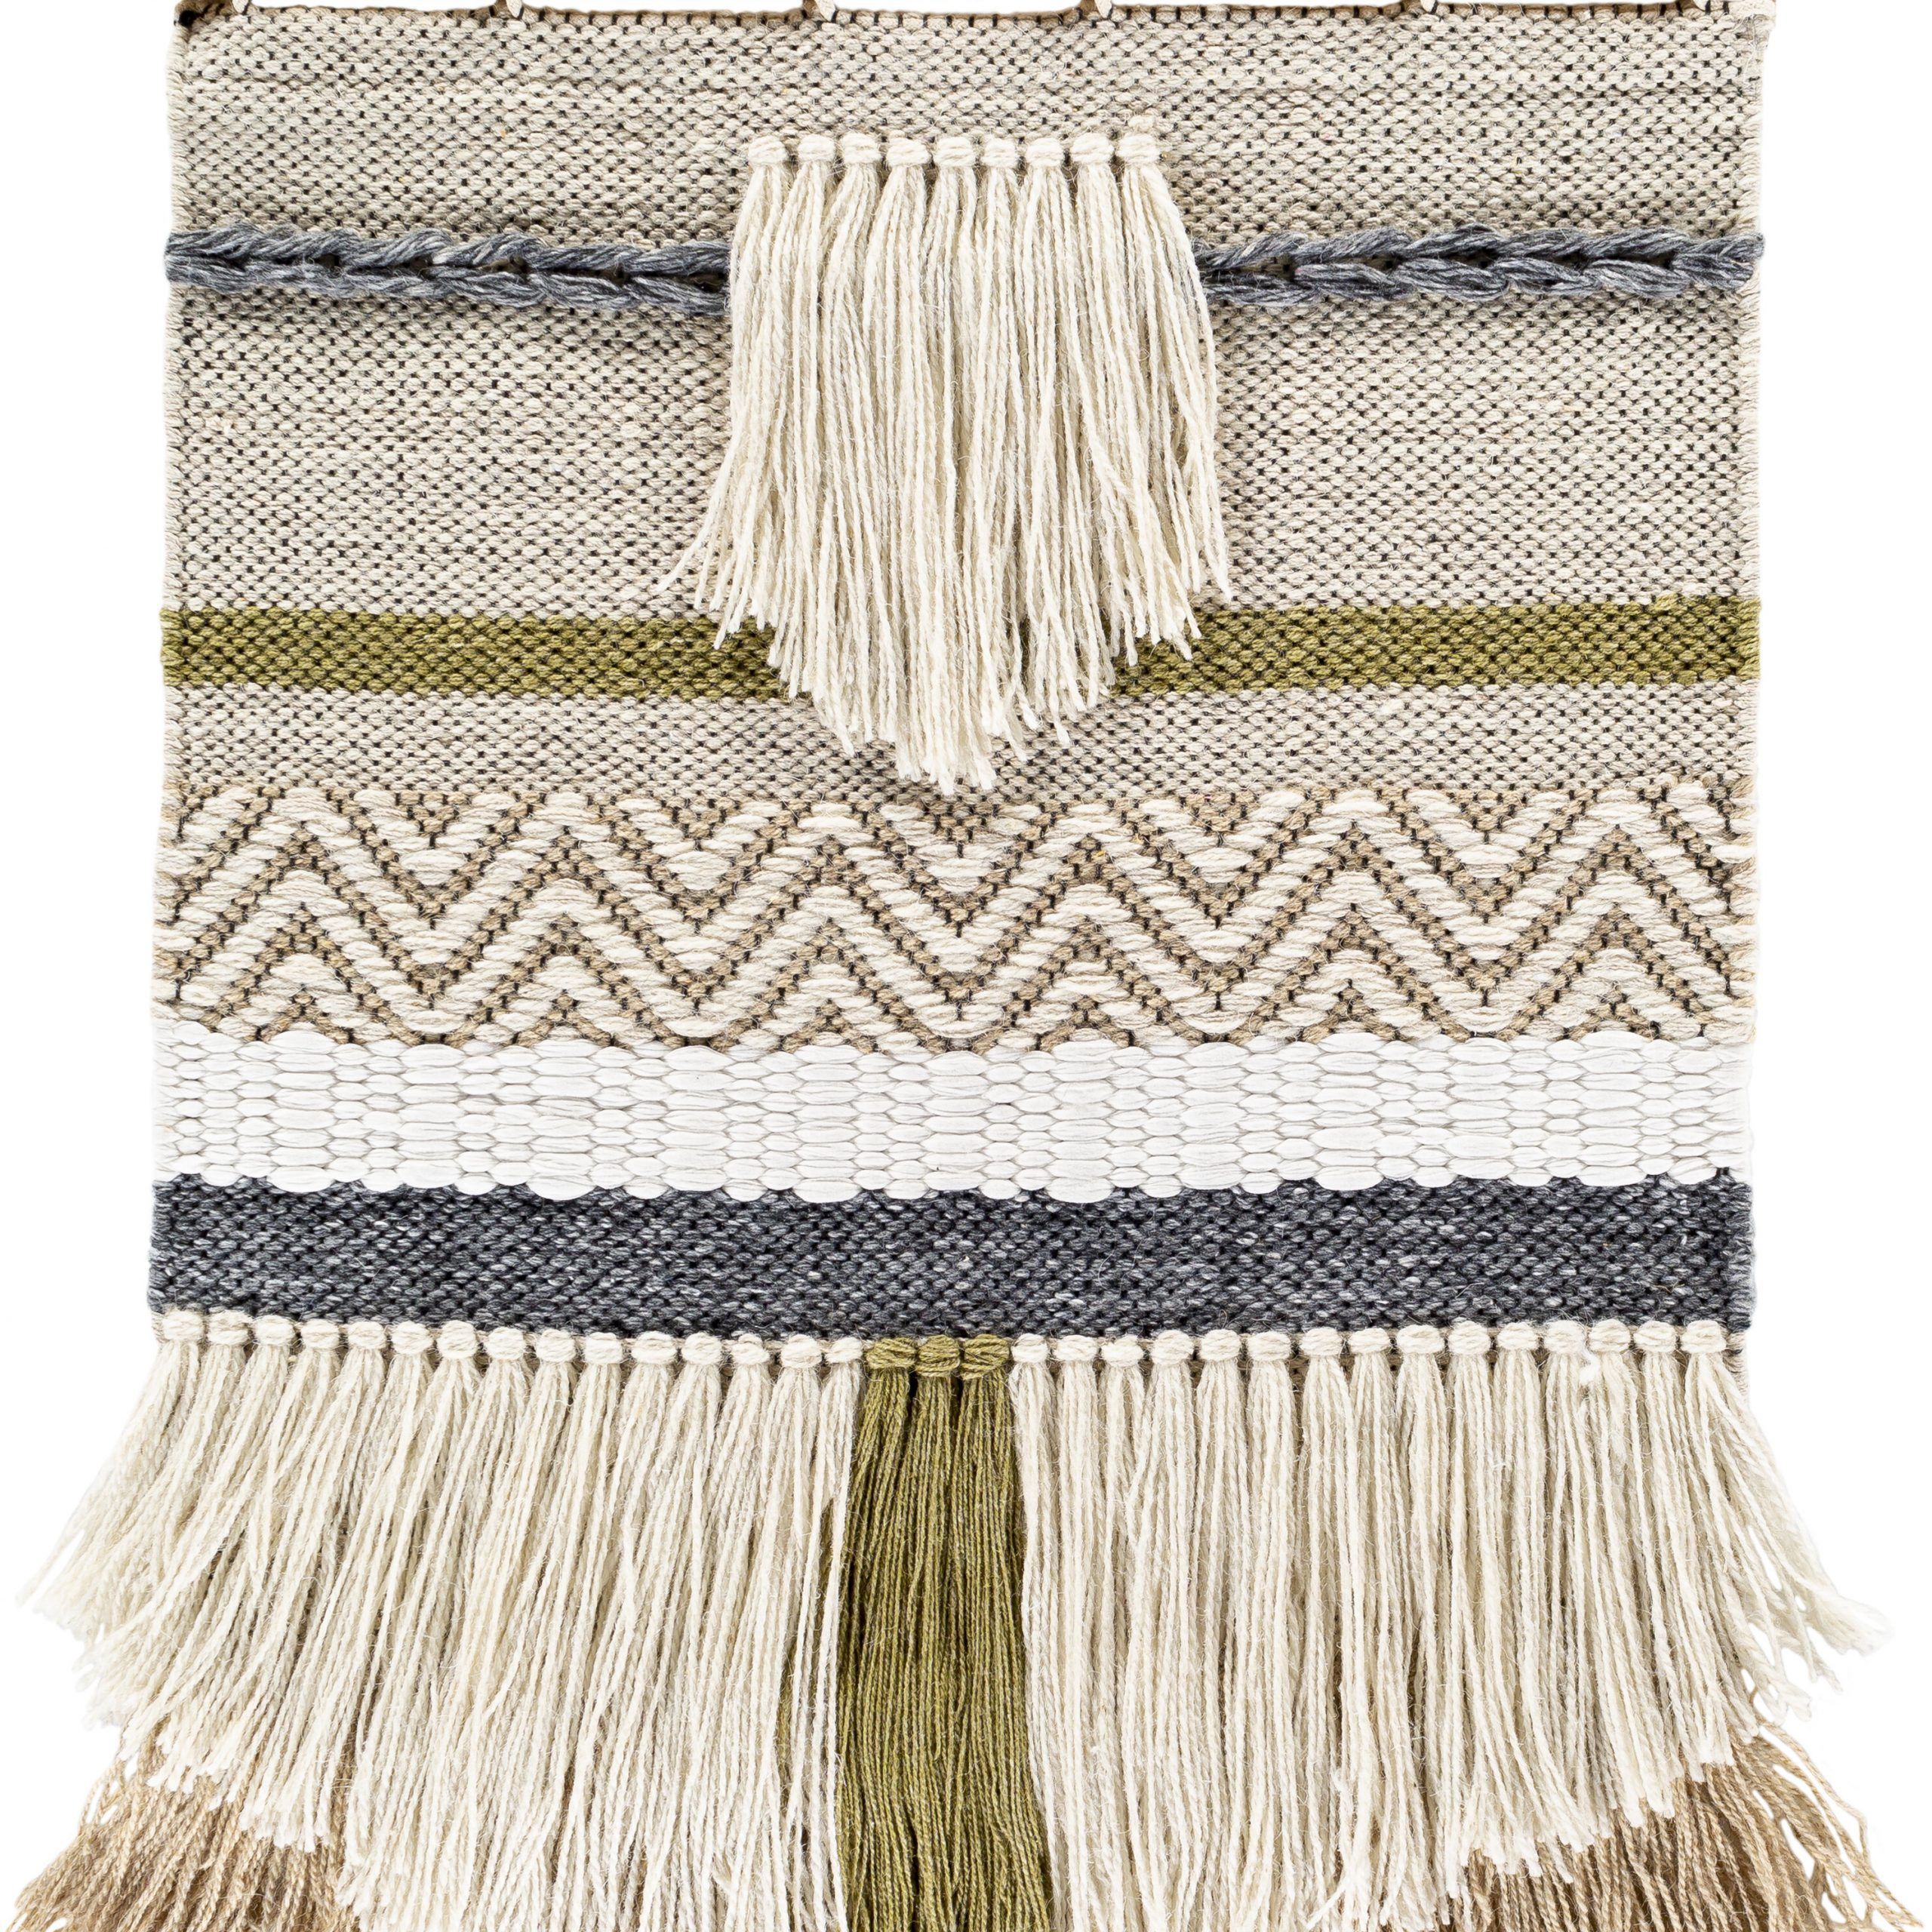 Blended Fabric Saiful Wall Hanging With Rod Throughout Best And Newest Blended Fabric Fringed Design Woven With Rod (View 3 of 20)